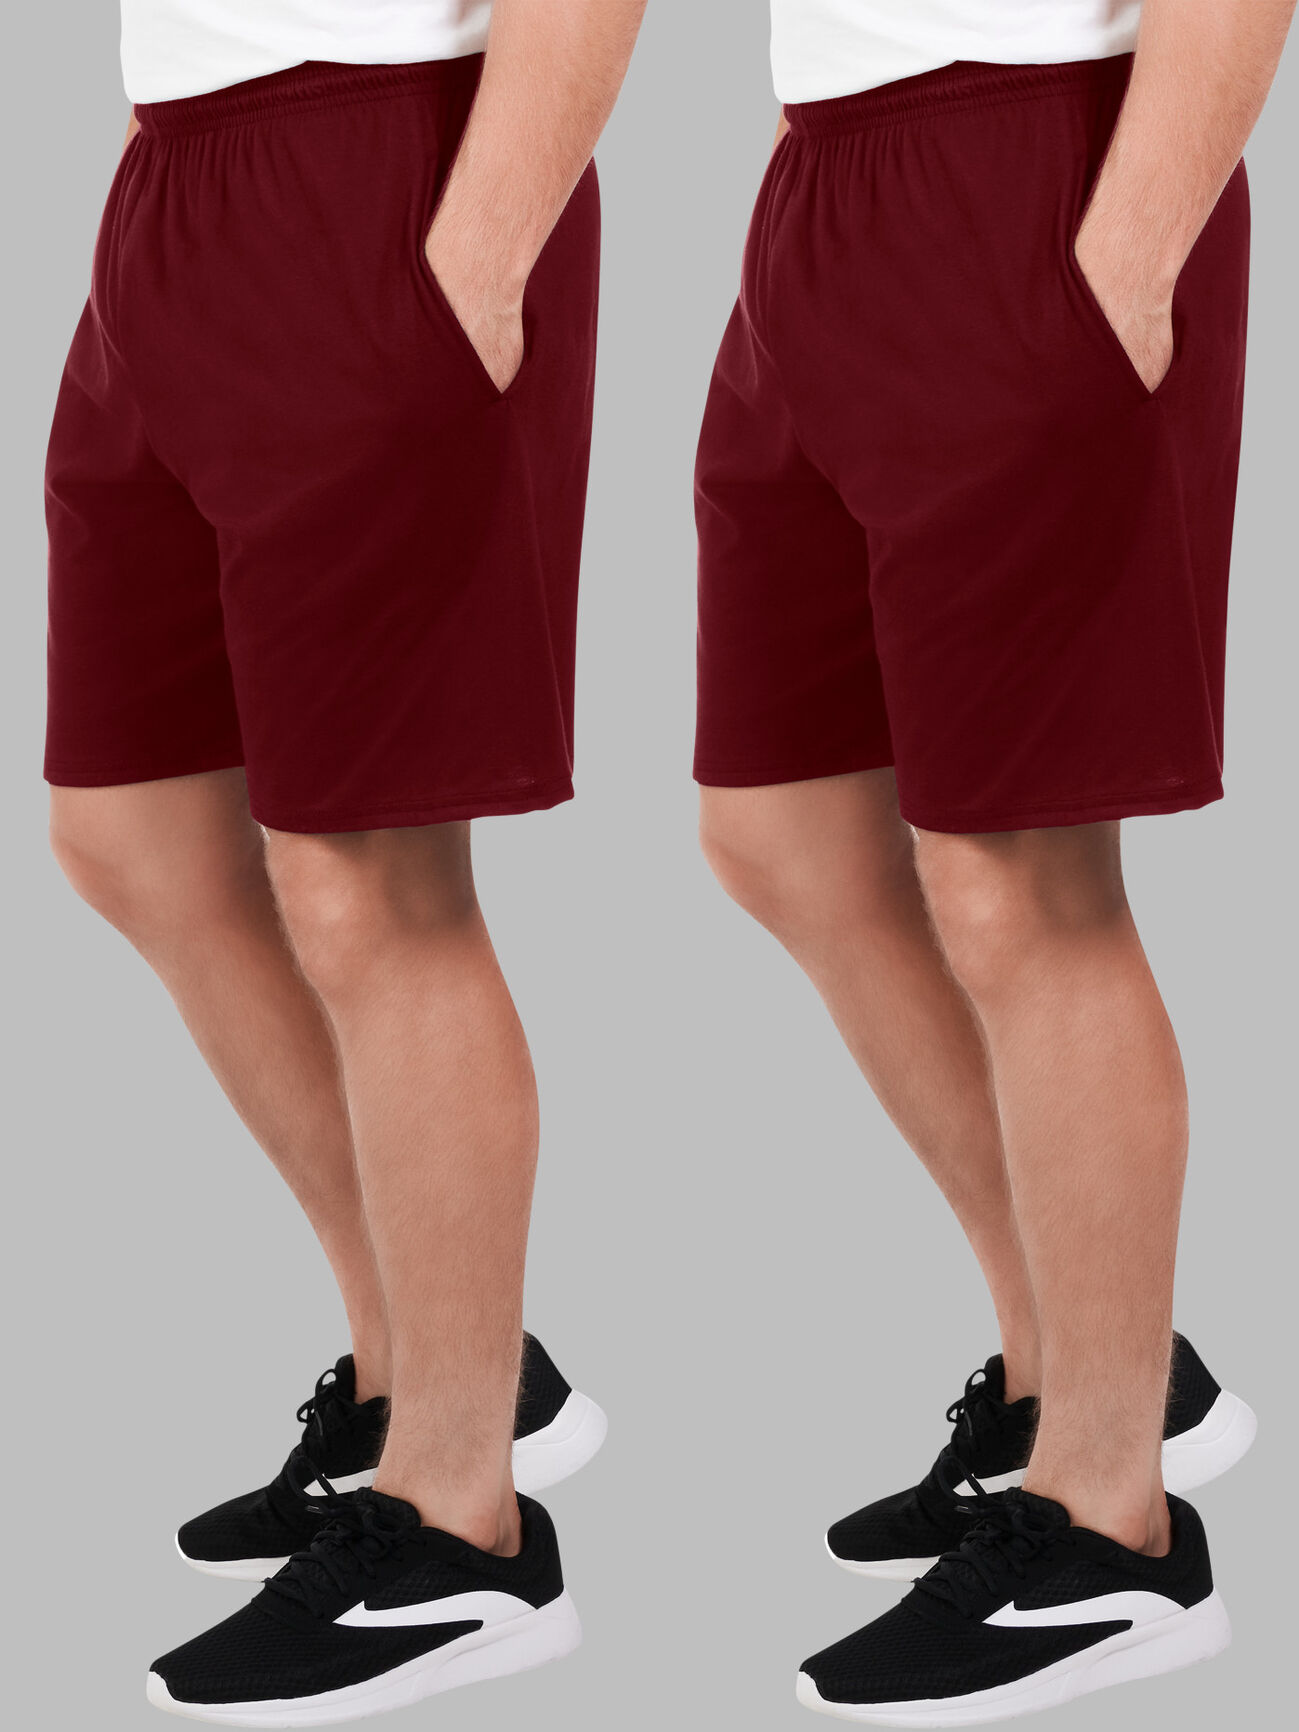 Men’sEversoft®  Jersey Shorts, Extended Sizes, 2 Pack 